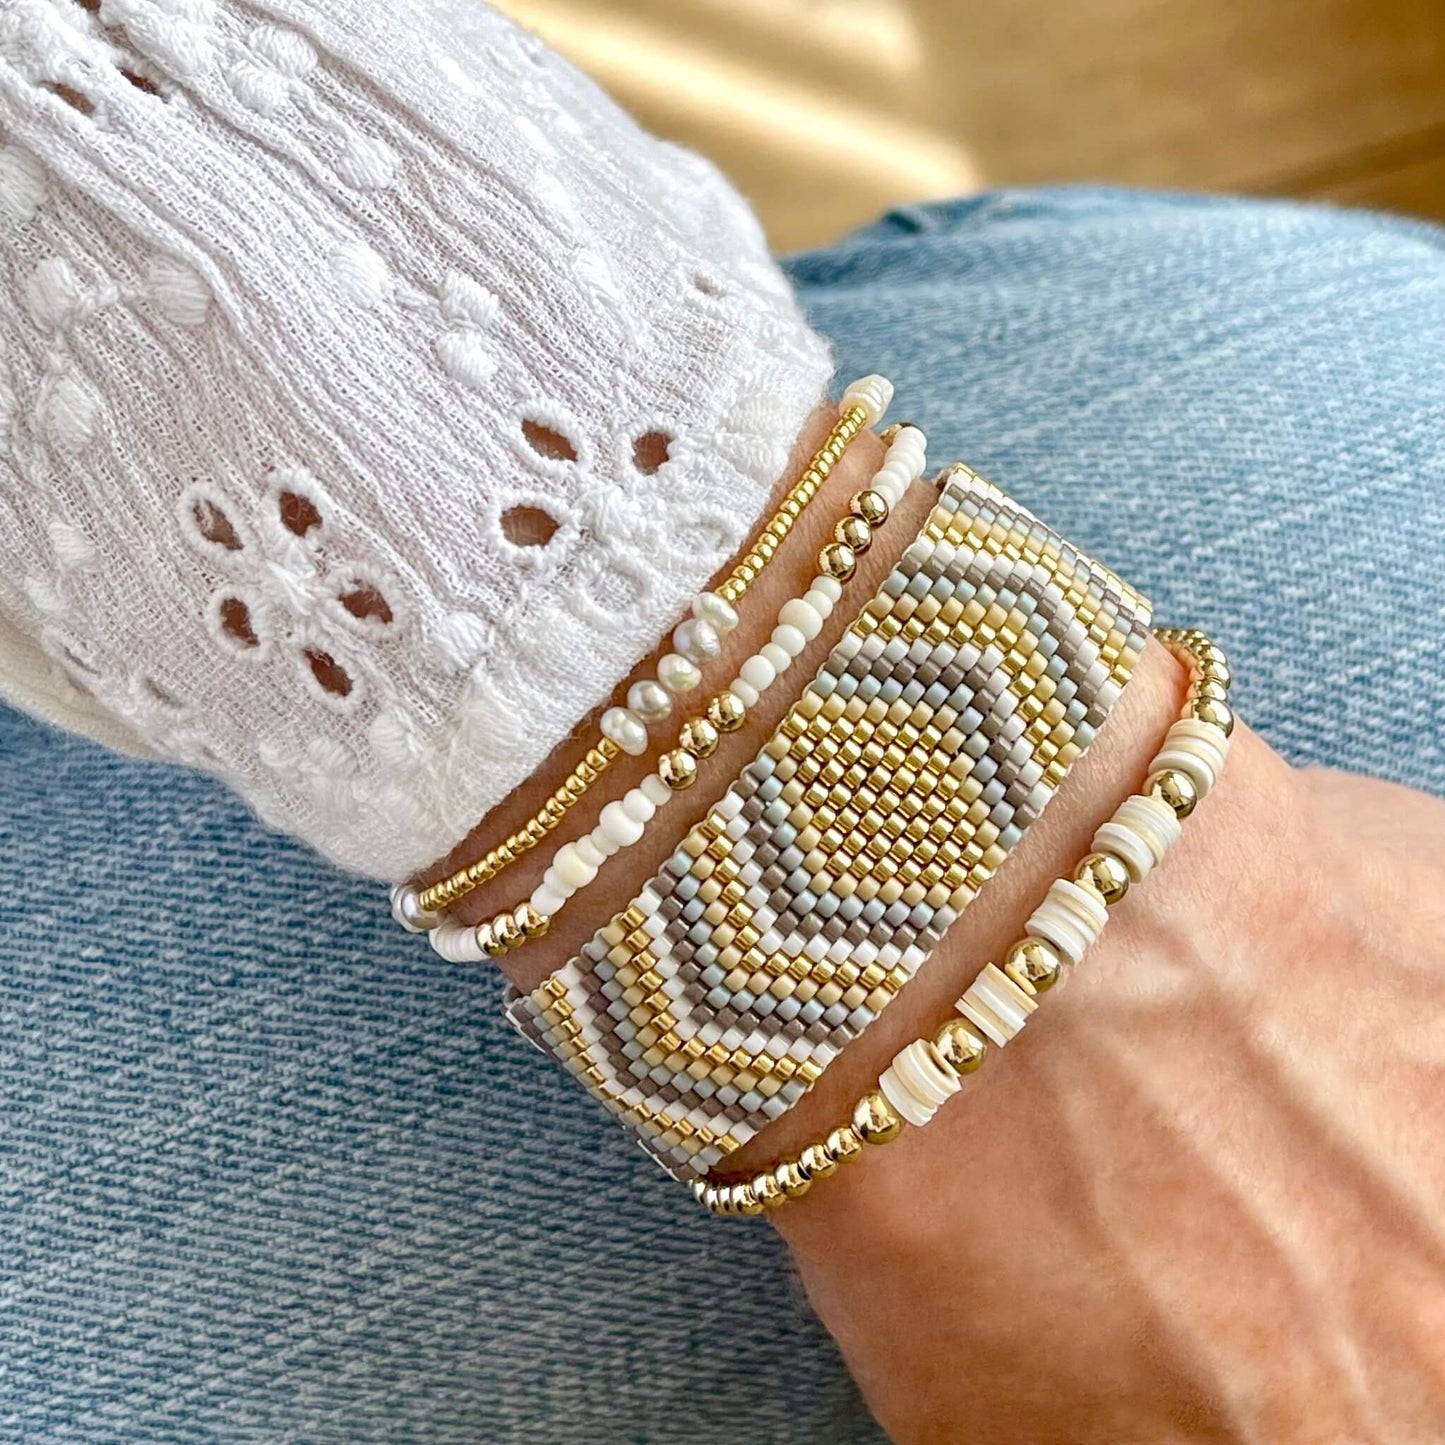 Beaded bracelet white and gold wristband stack with woven and stretch bracelets made from seed beads, freshwater pearls, heishi beads, and gold balls.